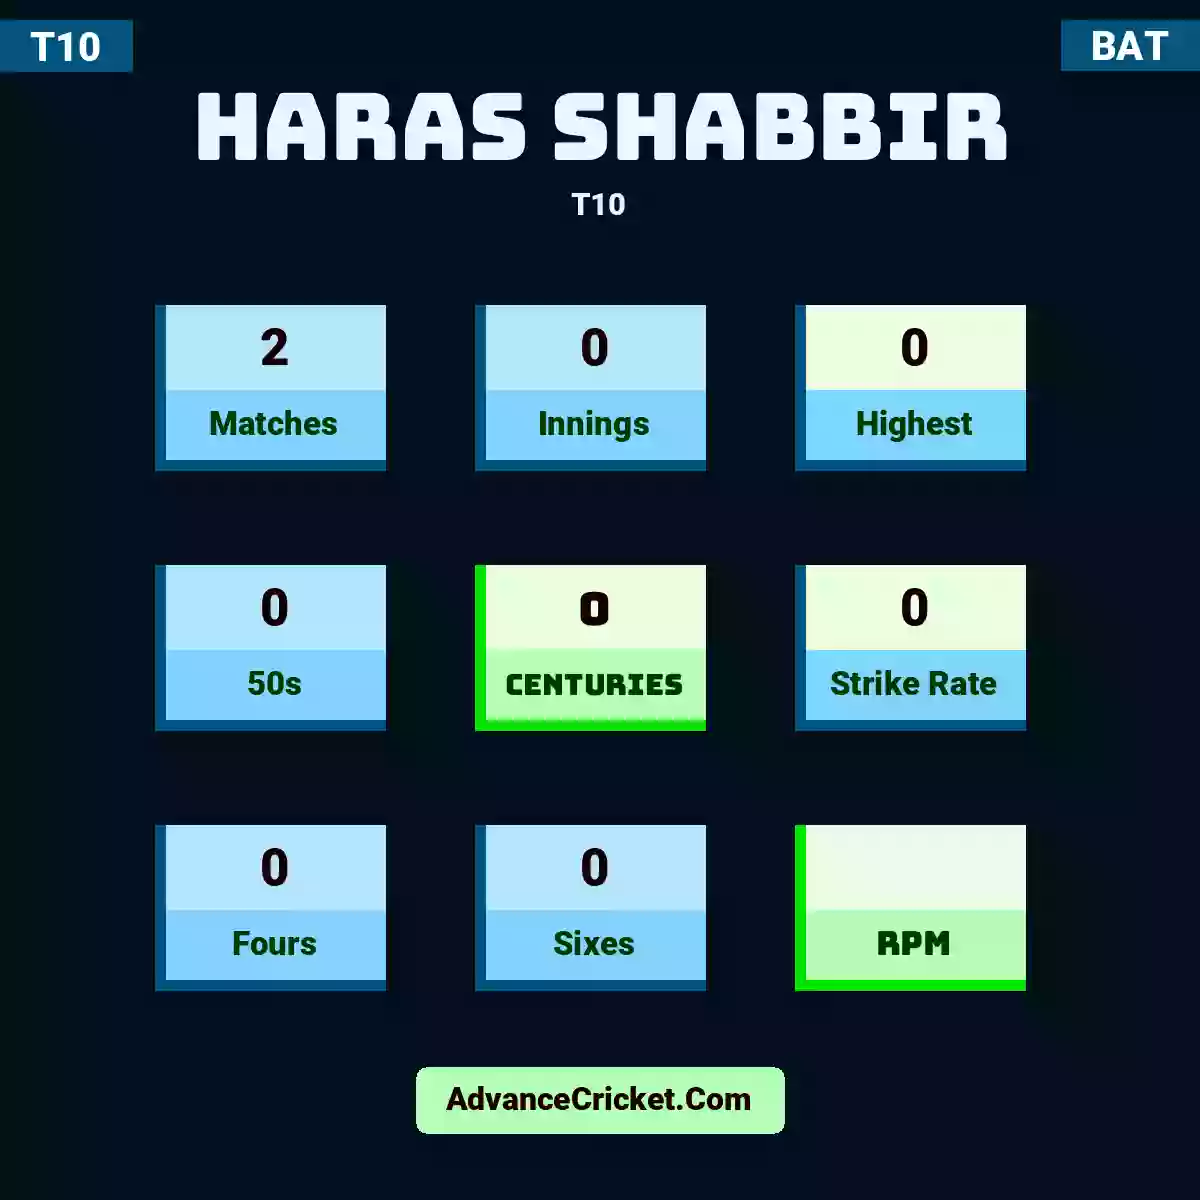 Haras Shabbir T10 , Haras Shabbir played 2 matches, scored 0 runs as highest, 0 half-centuries, and 0 centuries, with a strike rate of 0. H.Shabbir hit 0 fours and 0 sixes.